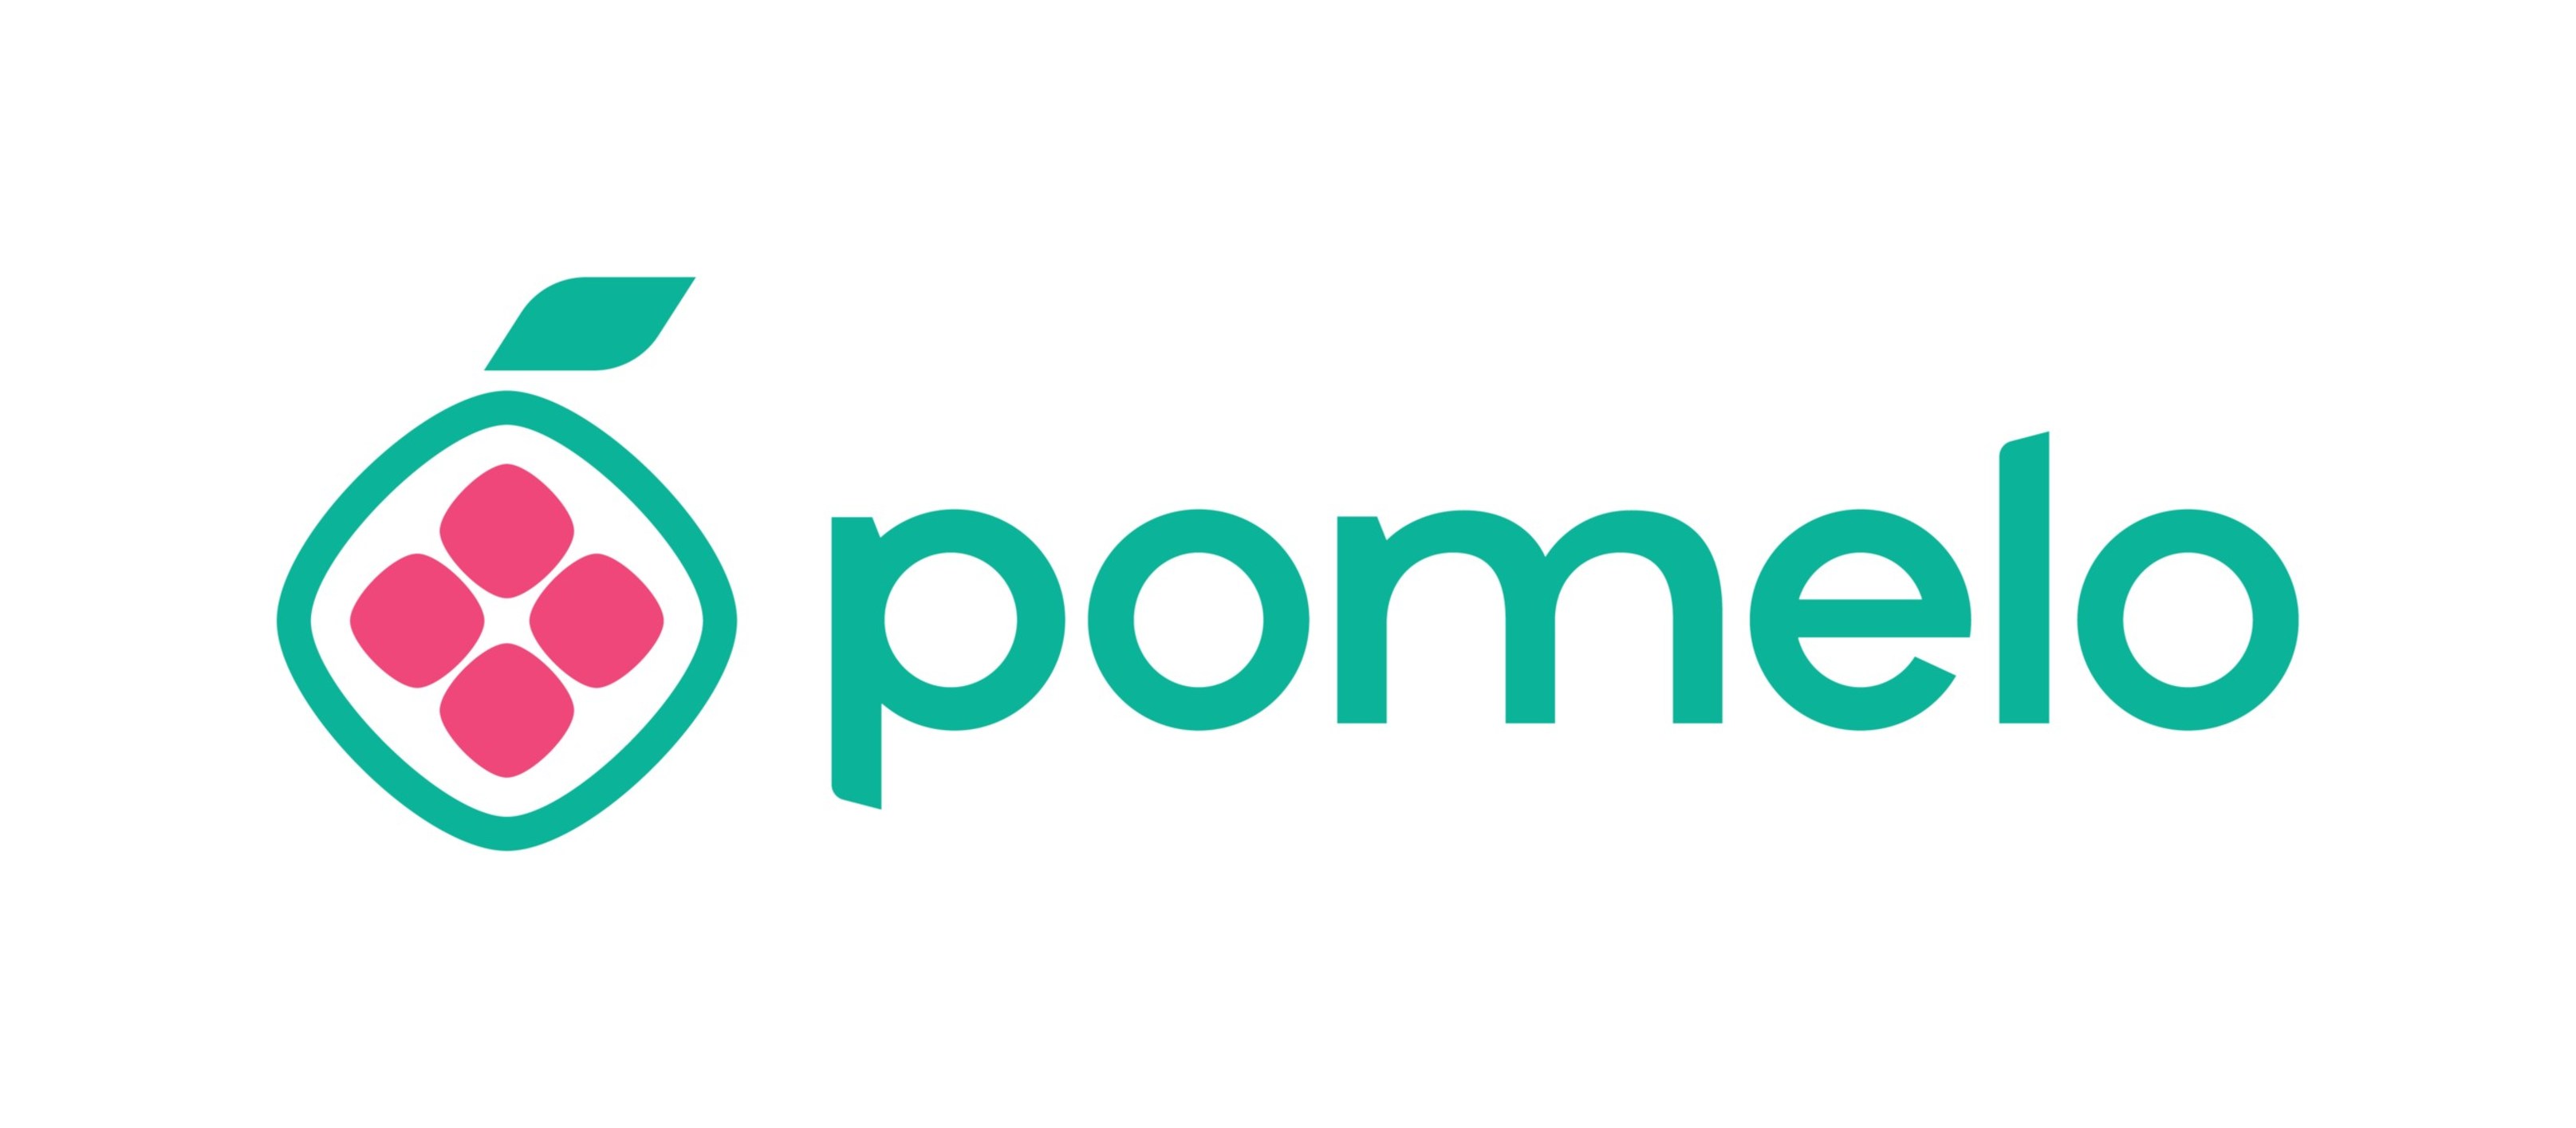 Payments Fintech Pomelo Pay Raises £2.1 Million Seed Round